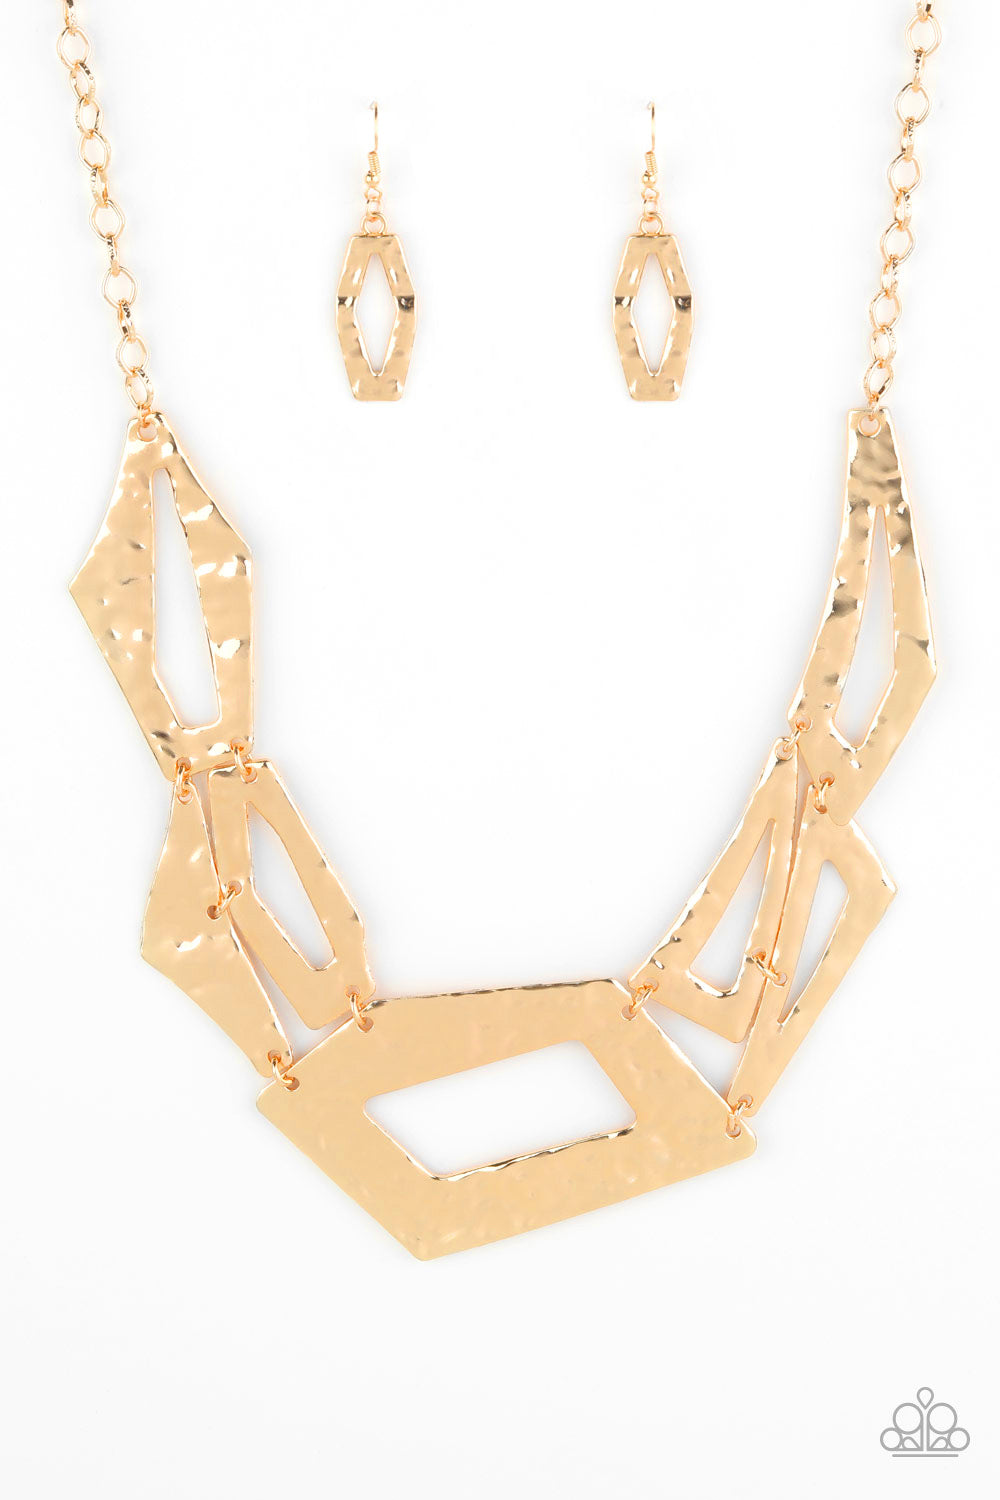 Break The Mold - Gold necklace